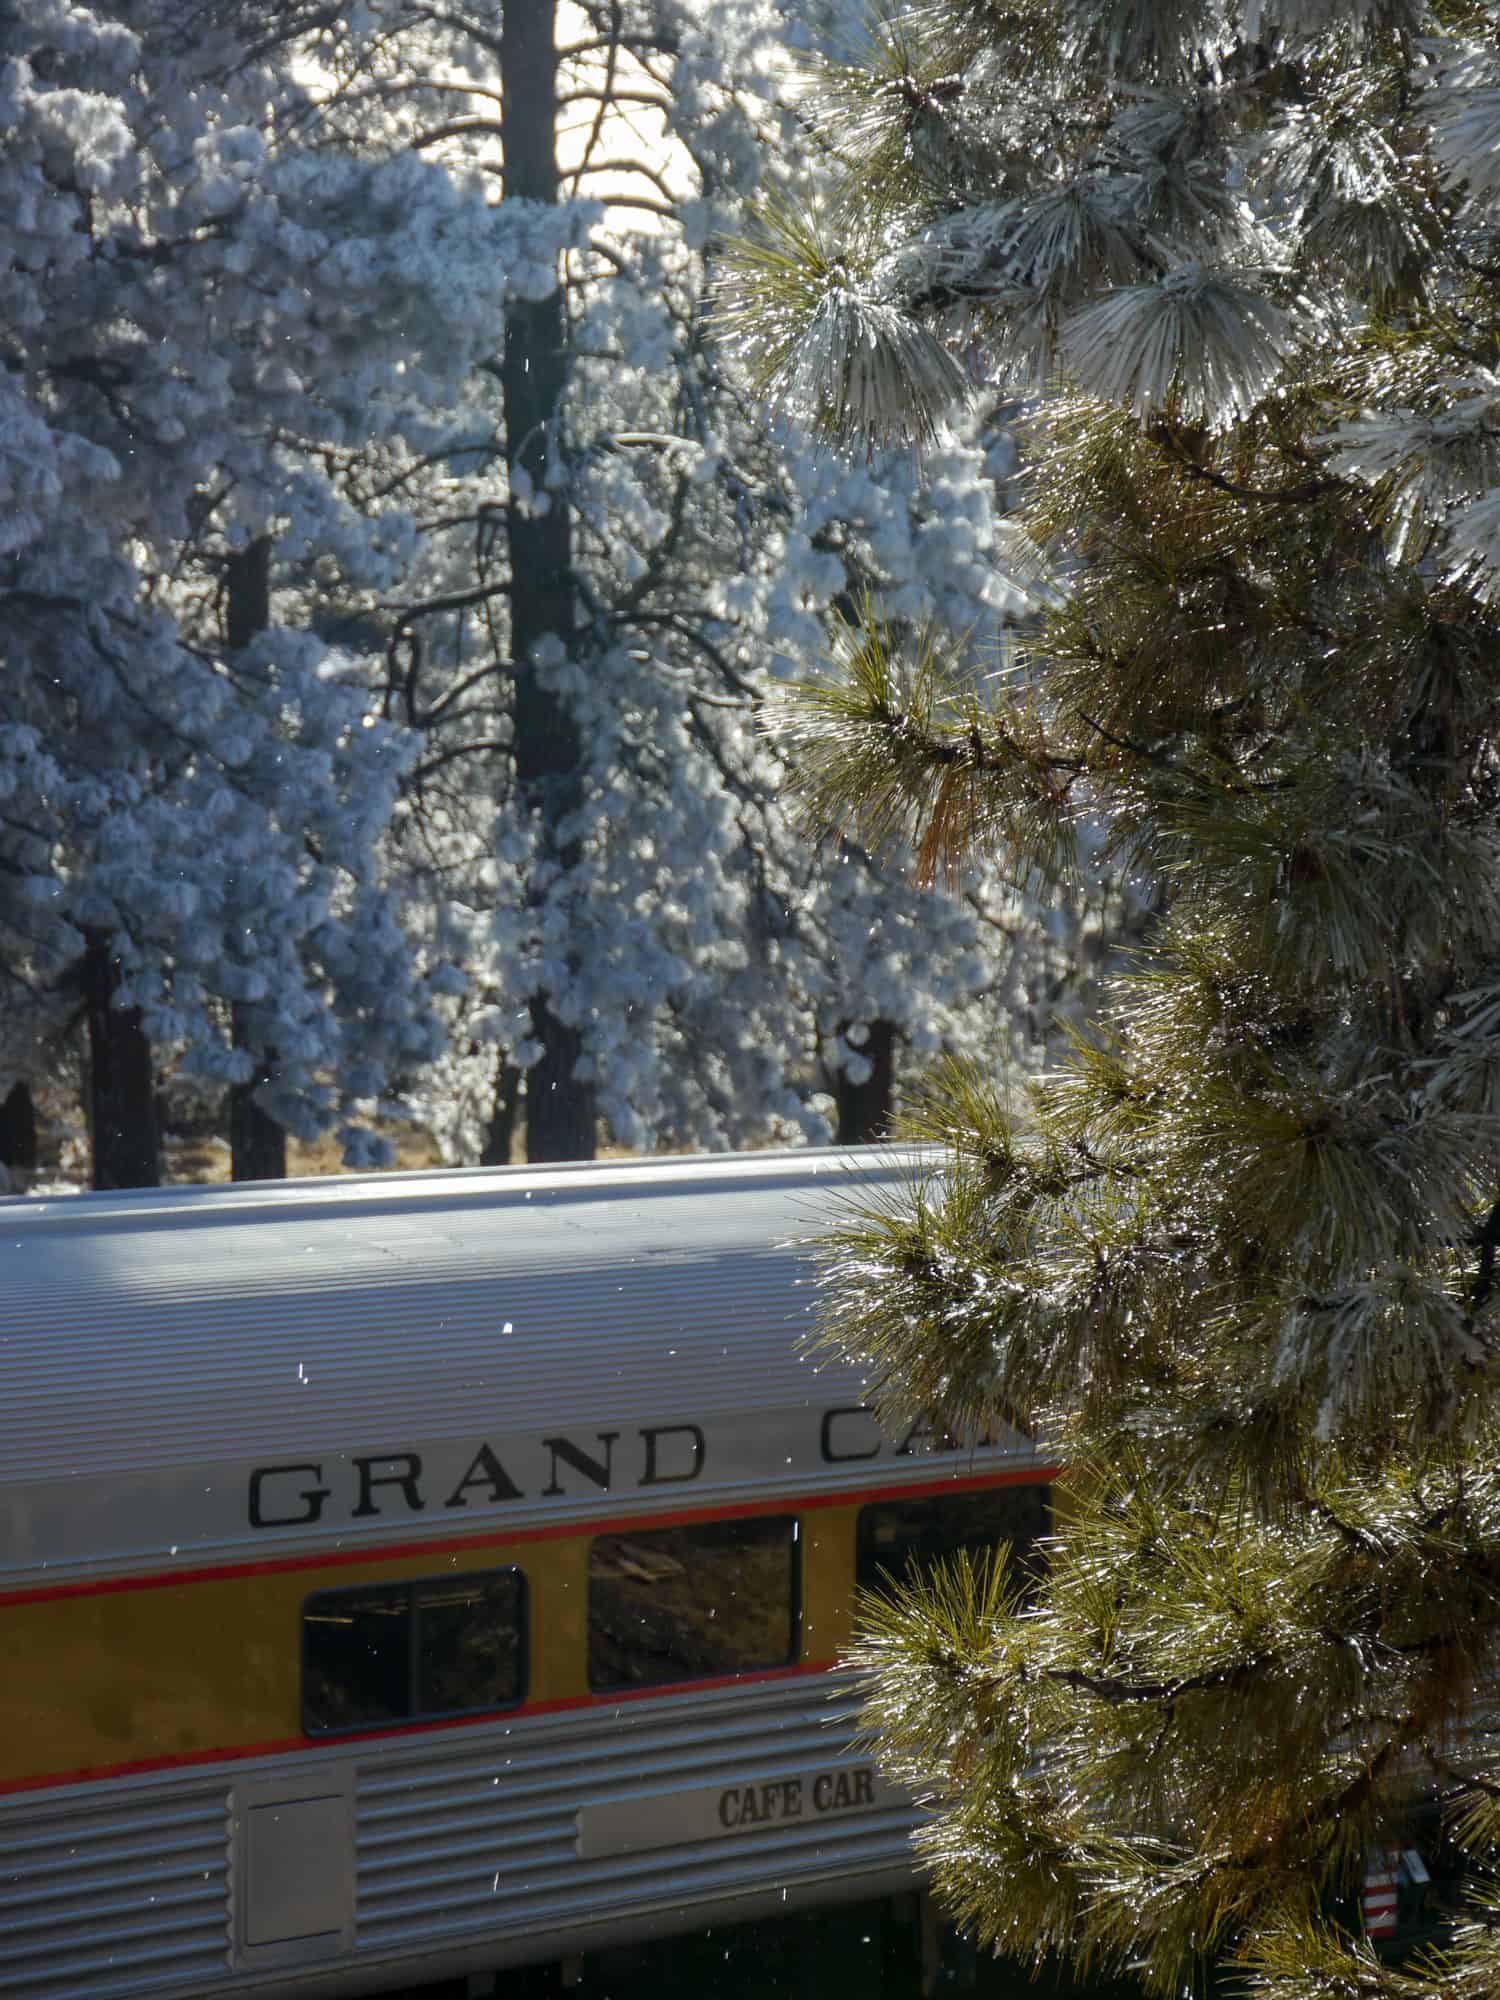 snow covered trees and the grand canyon train is an example of being creative while photographing the grand canyon